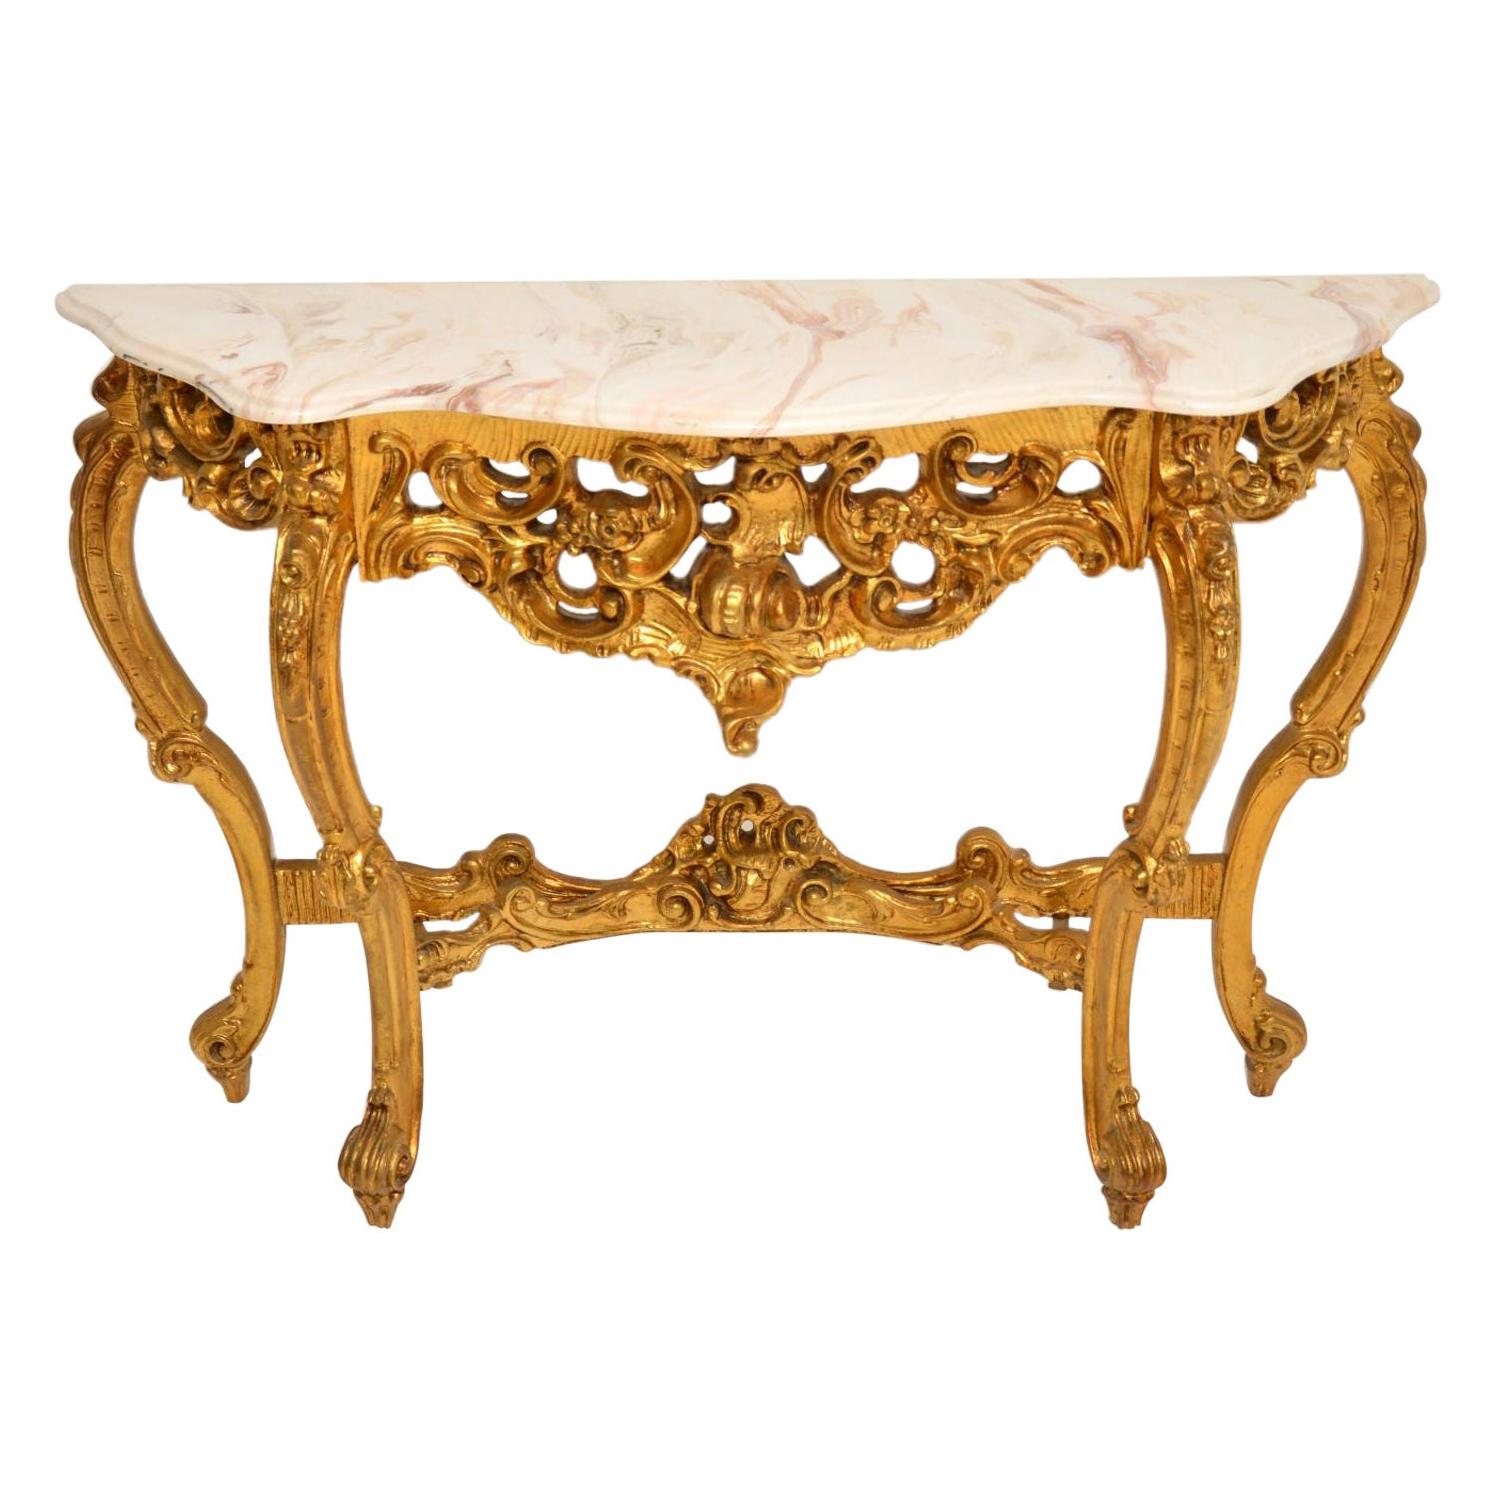 Antique French Style Gilt Wood Console Table